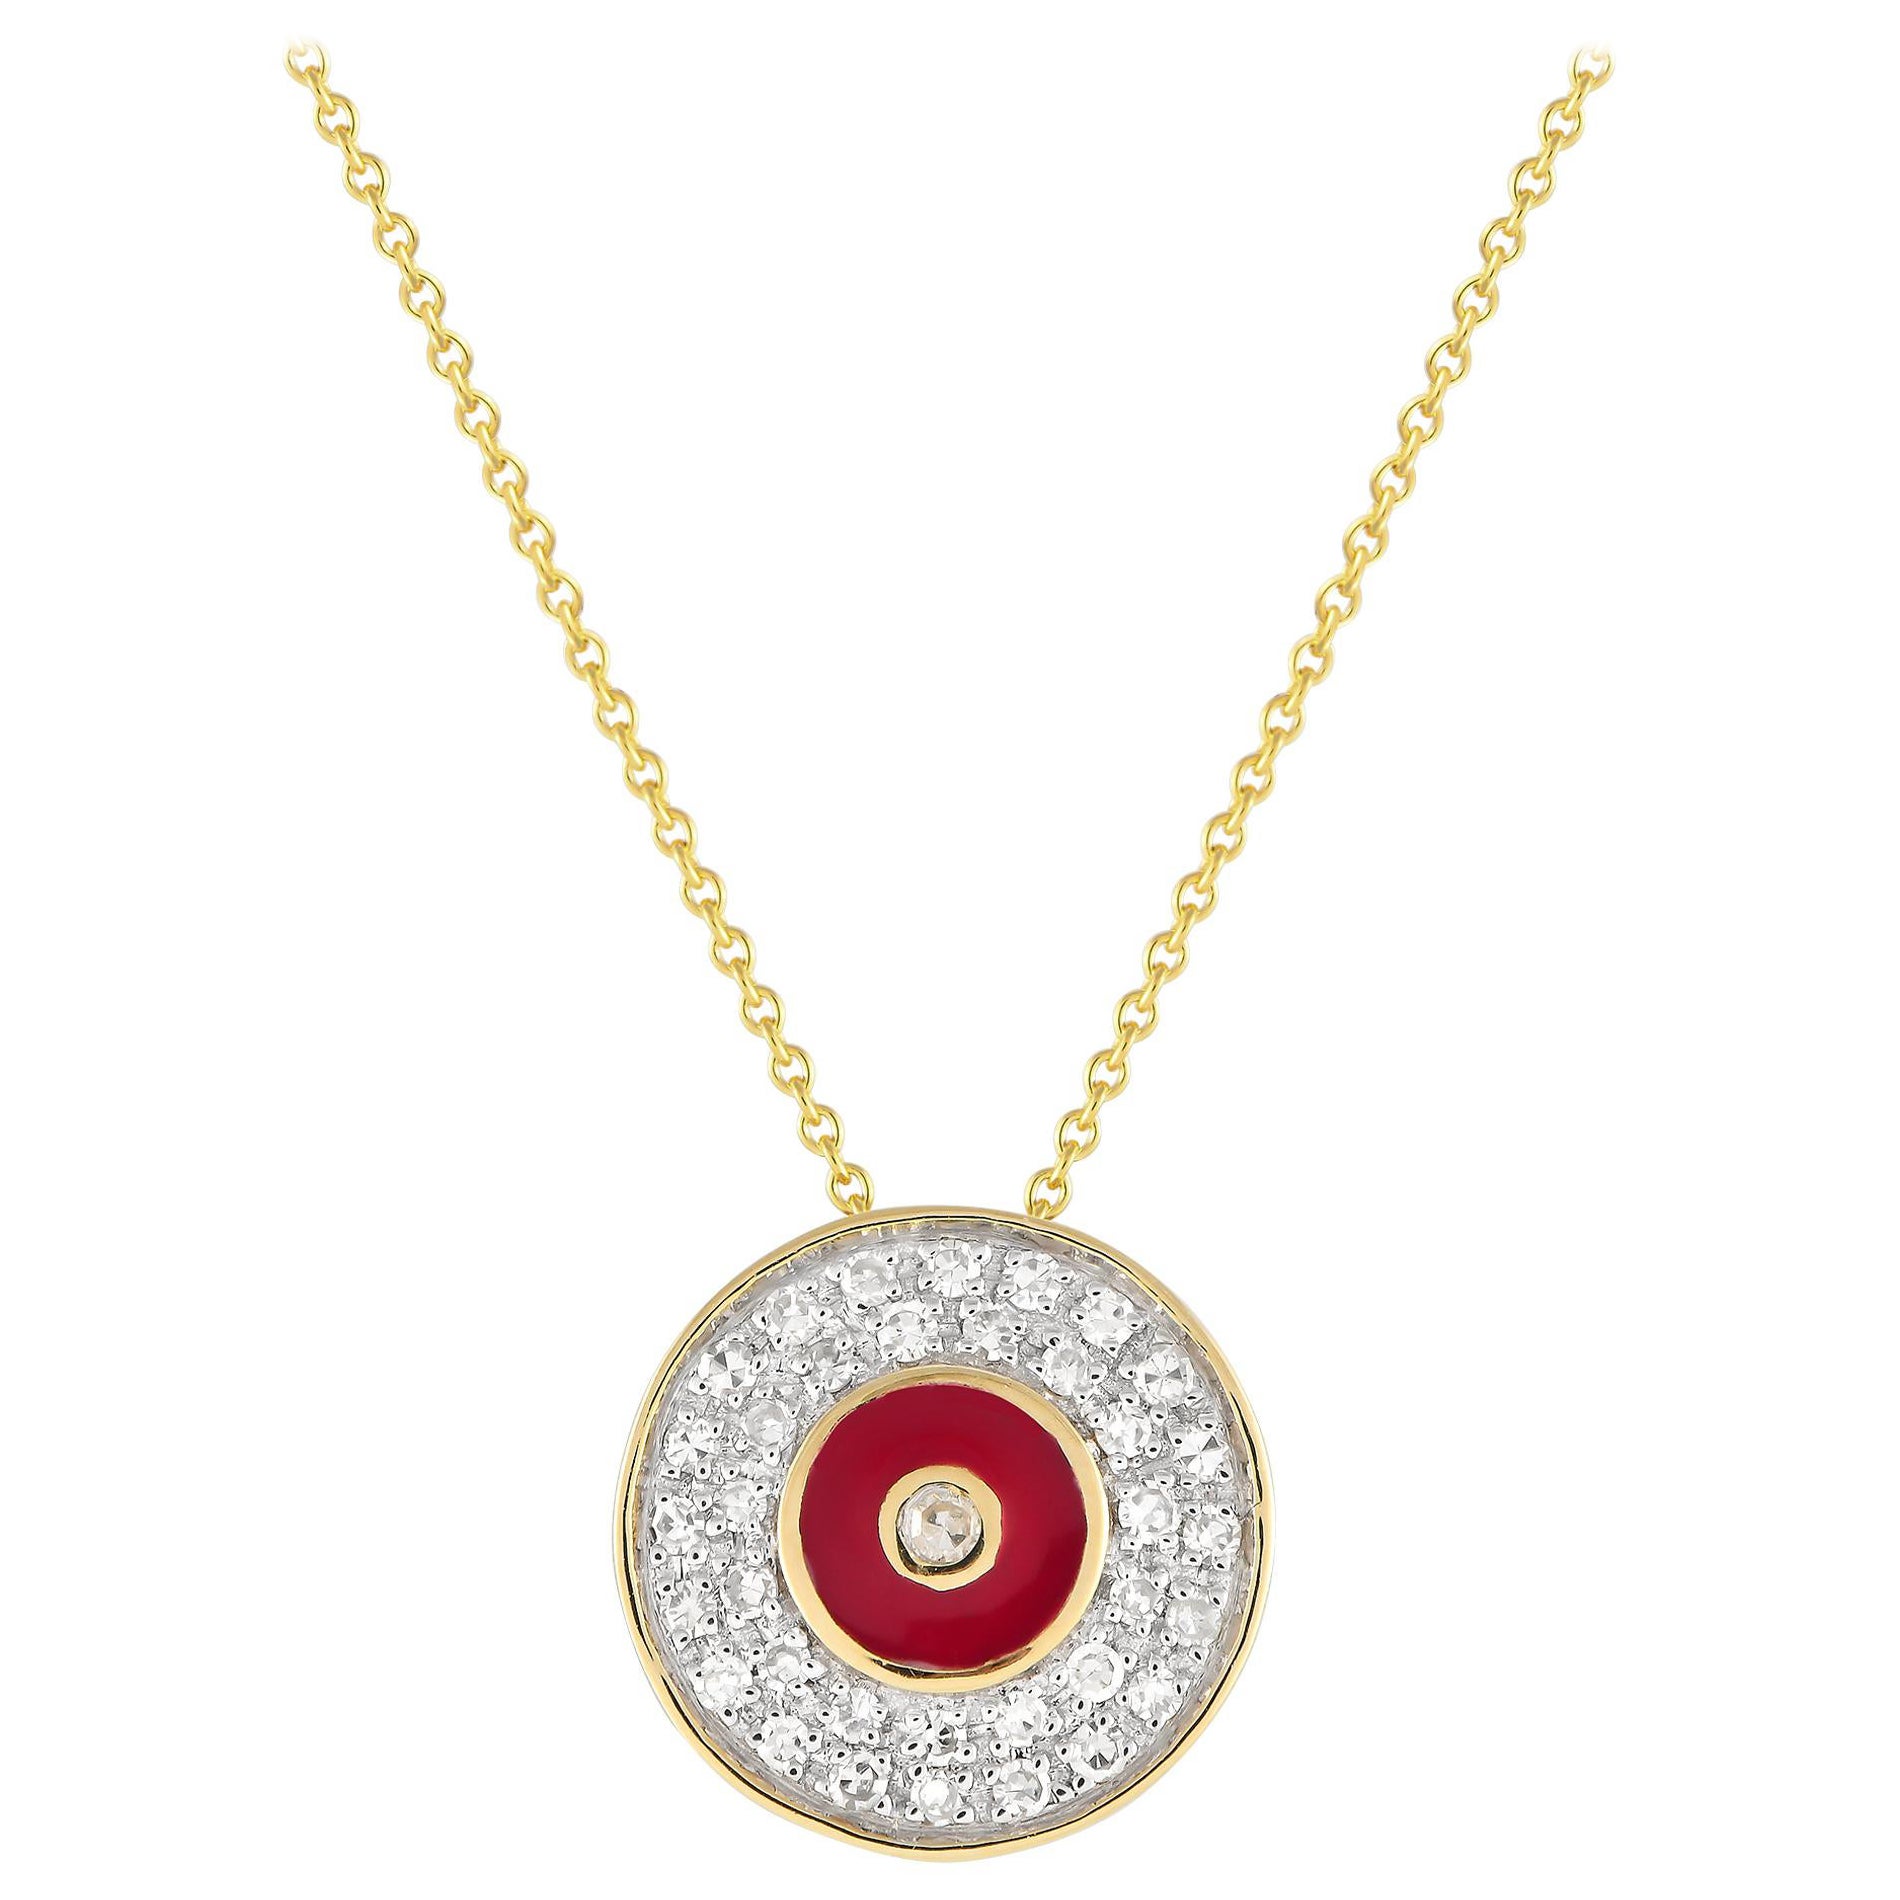 LB Exclusive 14K Yellow Gold 0.20ct Diamond Red Disk Necklace P15060